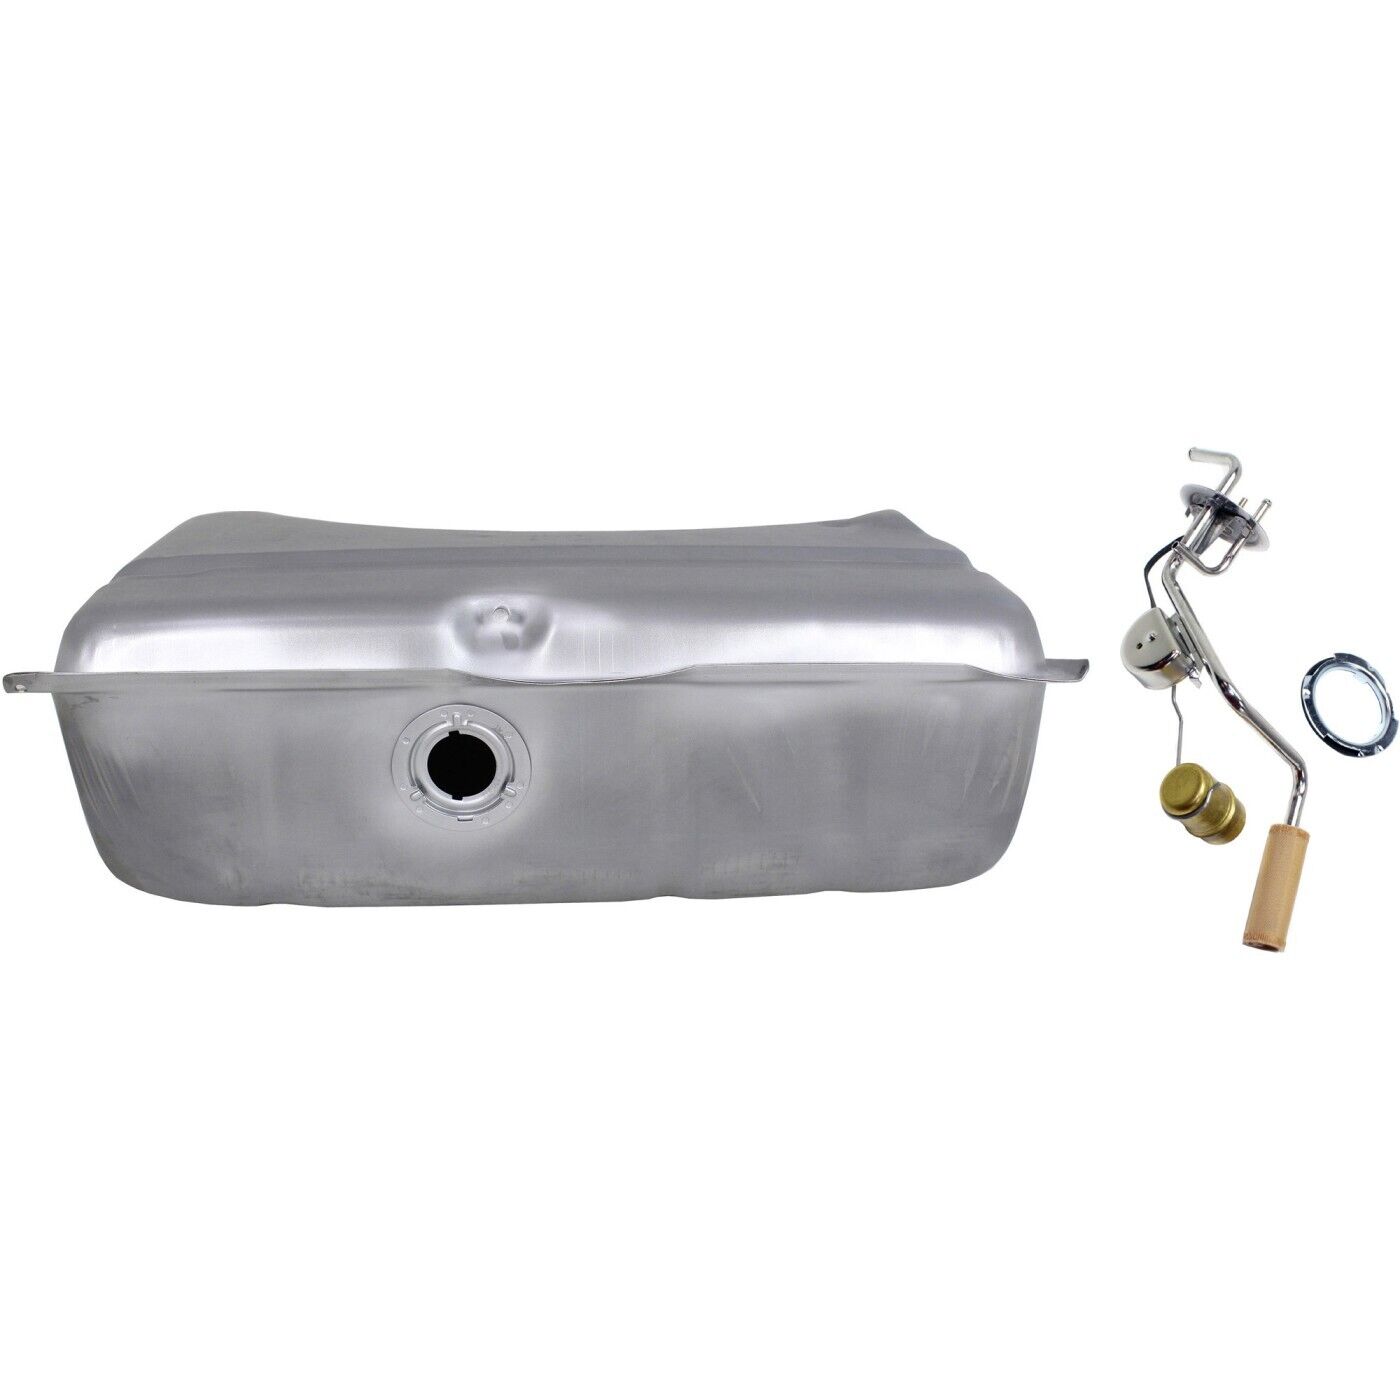 Fuel Tank Kit For 1971-1976 Dodge Dart 16 Gallons Painted Galvanized Steel